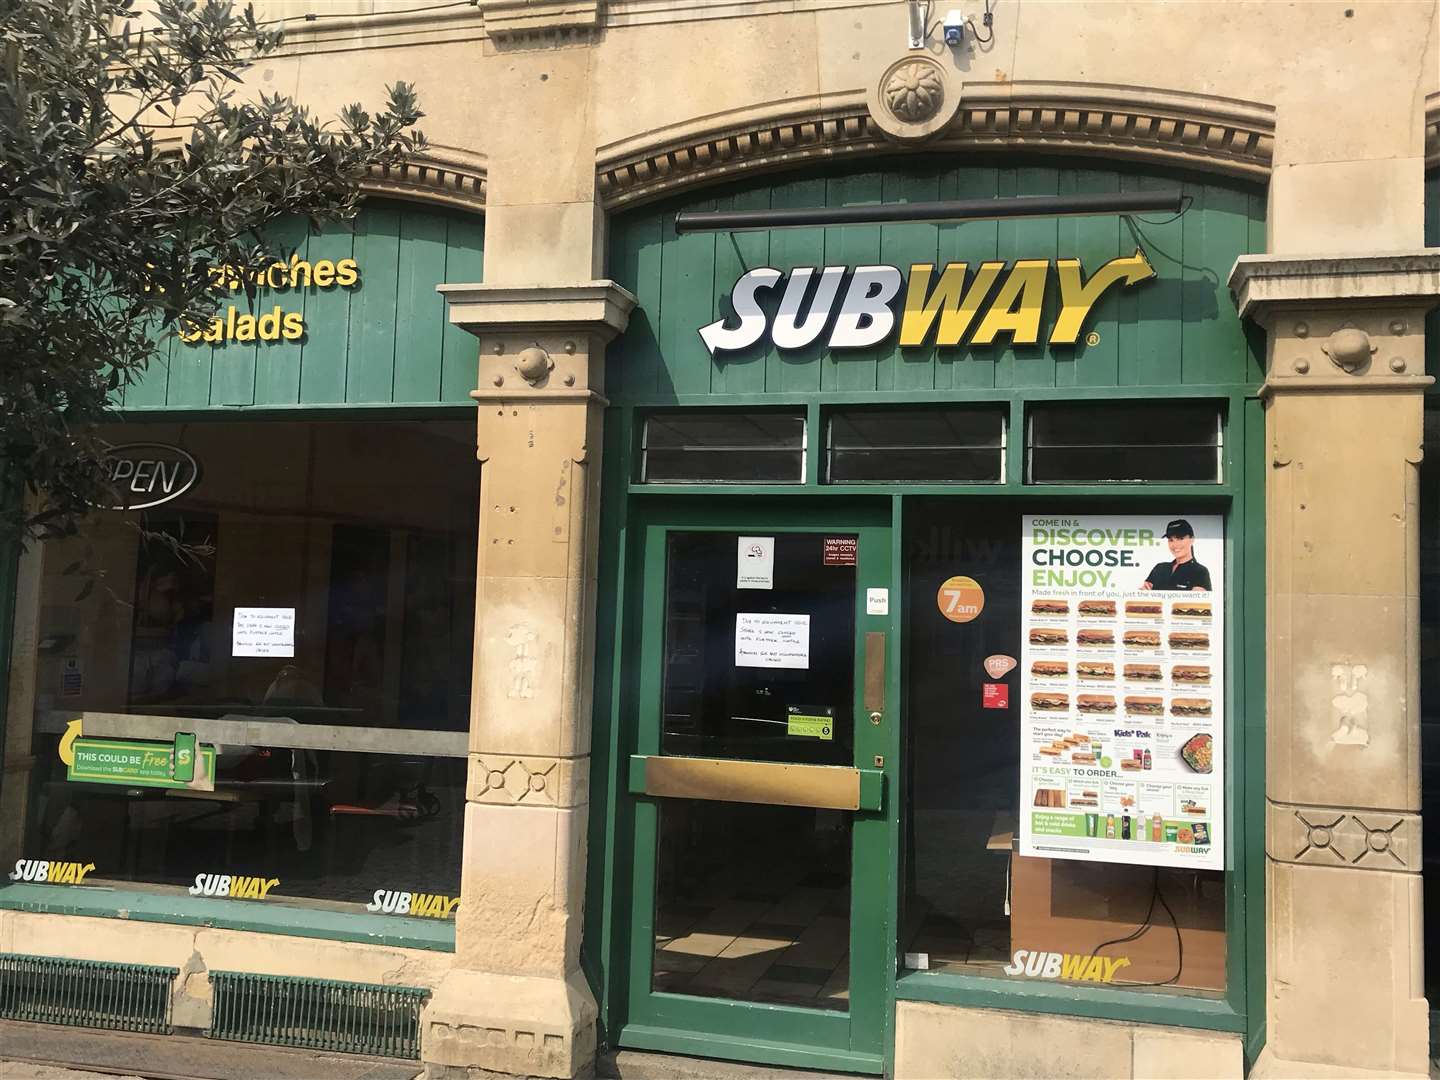 More than 20 Subway branches have reopened for takeaway and delivery across Kent